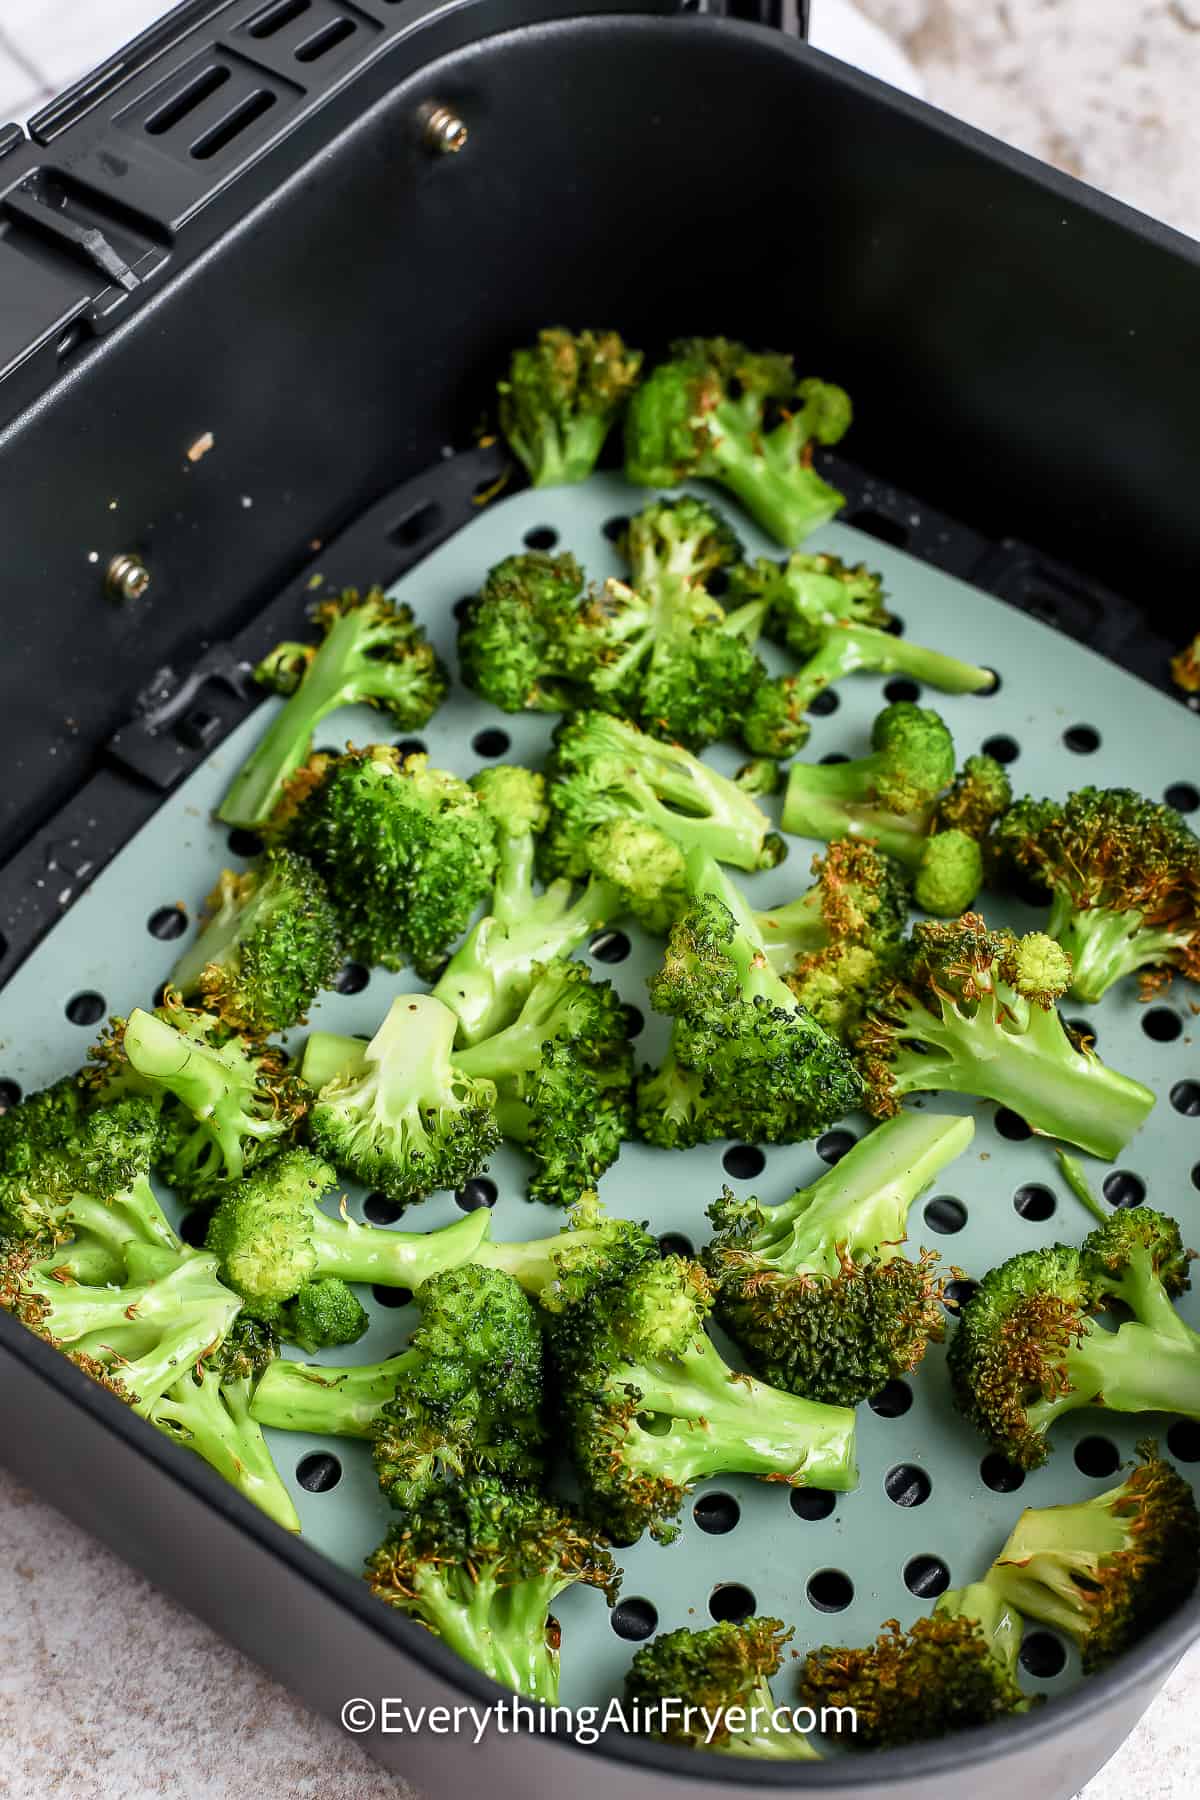 Broccoli cooked in an air fryer basket